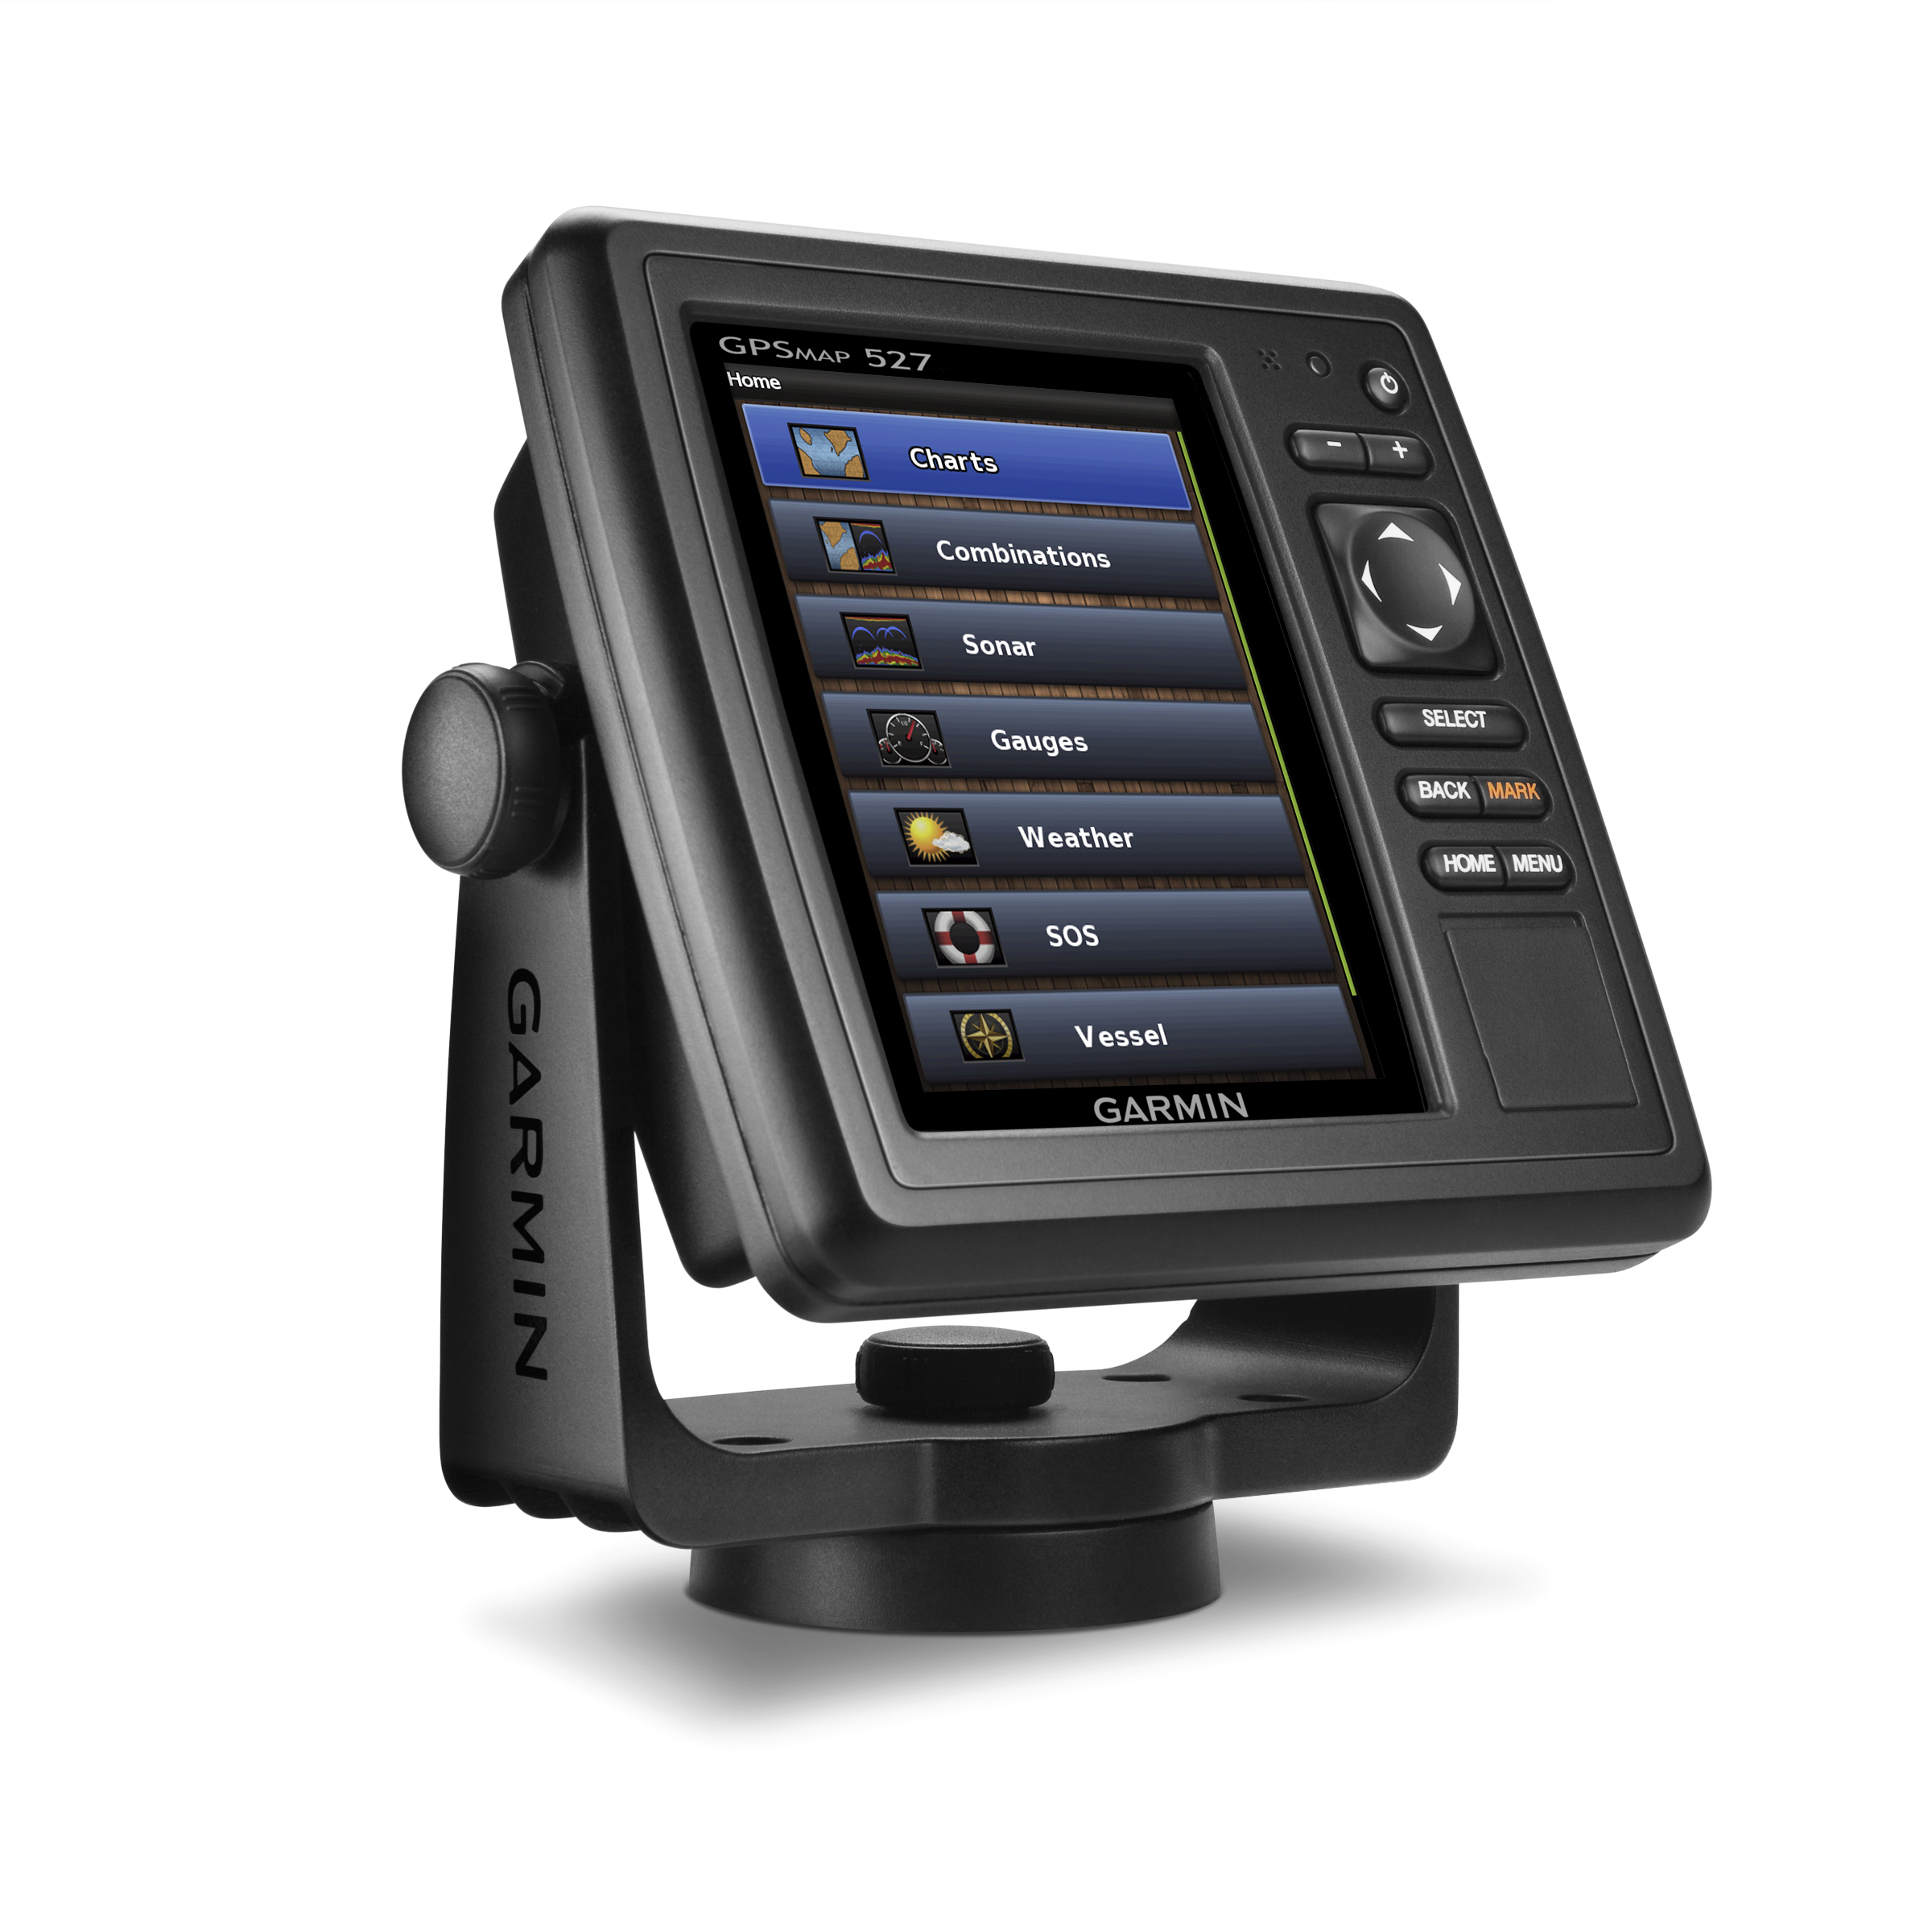 Garmin® Introduces New GPSMAP® 500 and 700 Chartplotter and Combo Units - Garmin